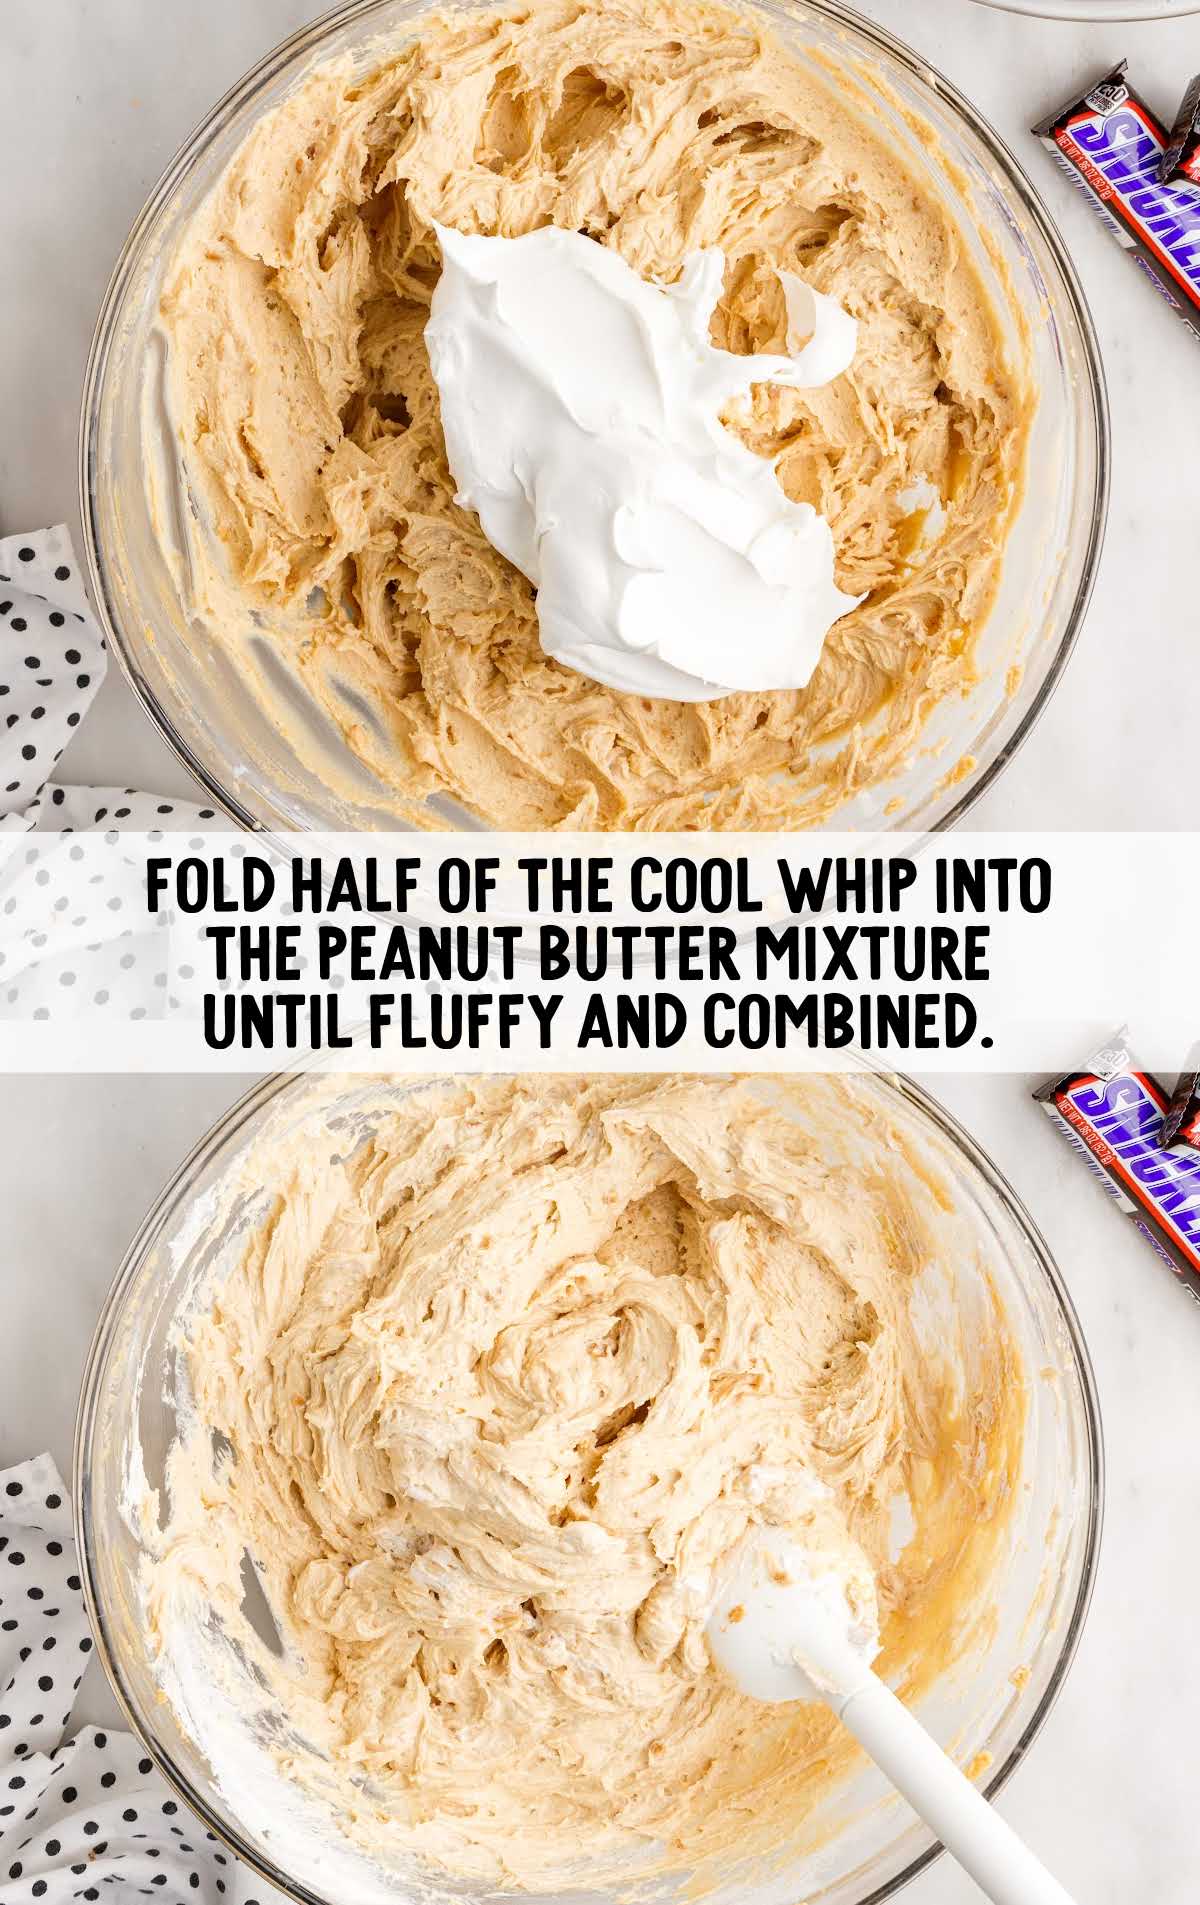 cool whip folded into the peanut butter mixture in a bowl